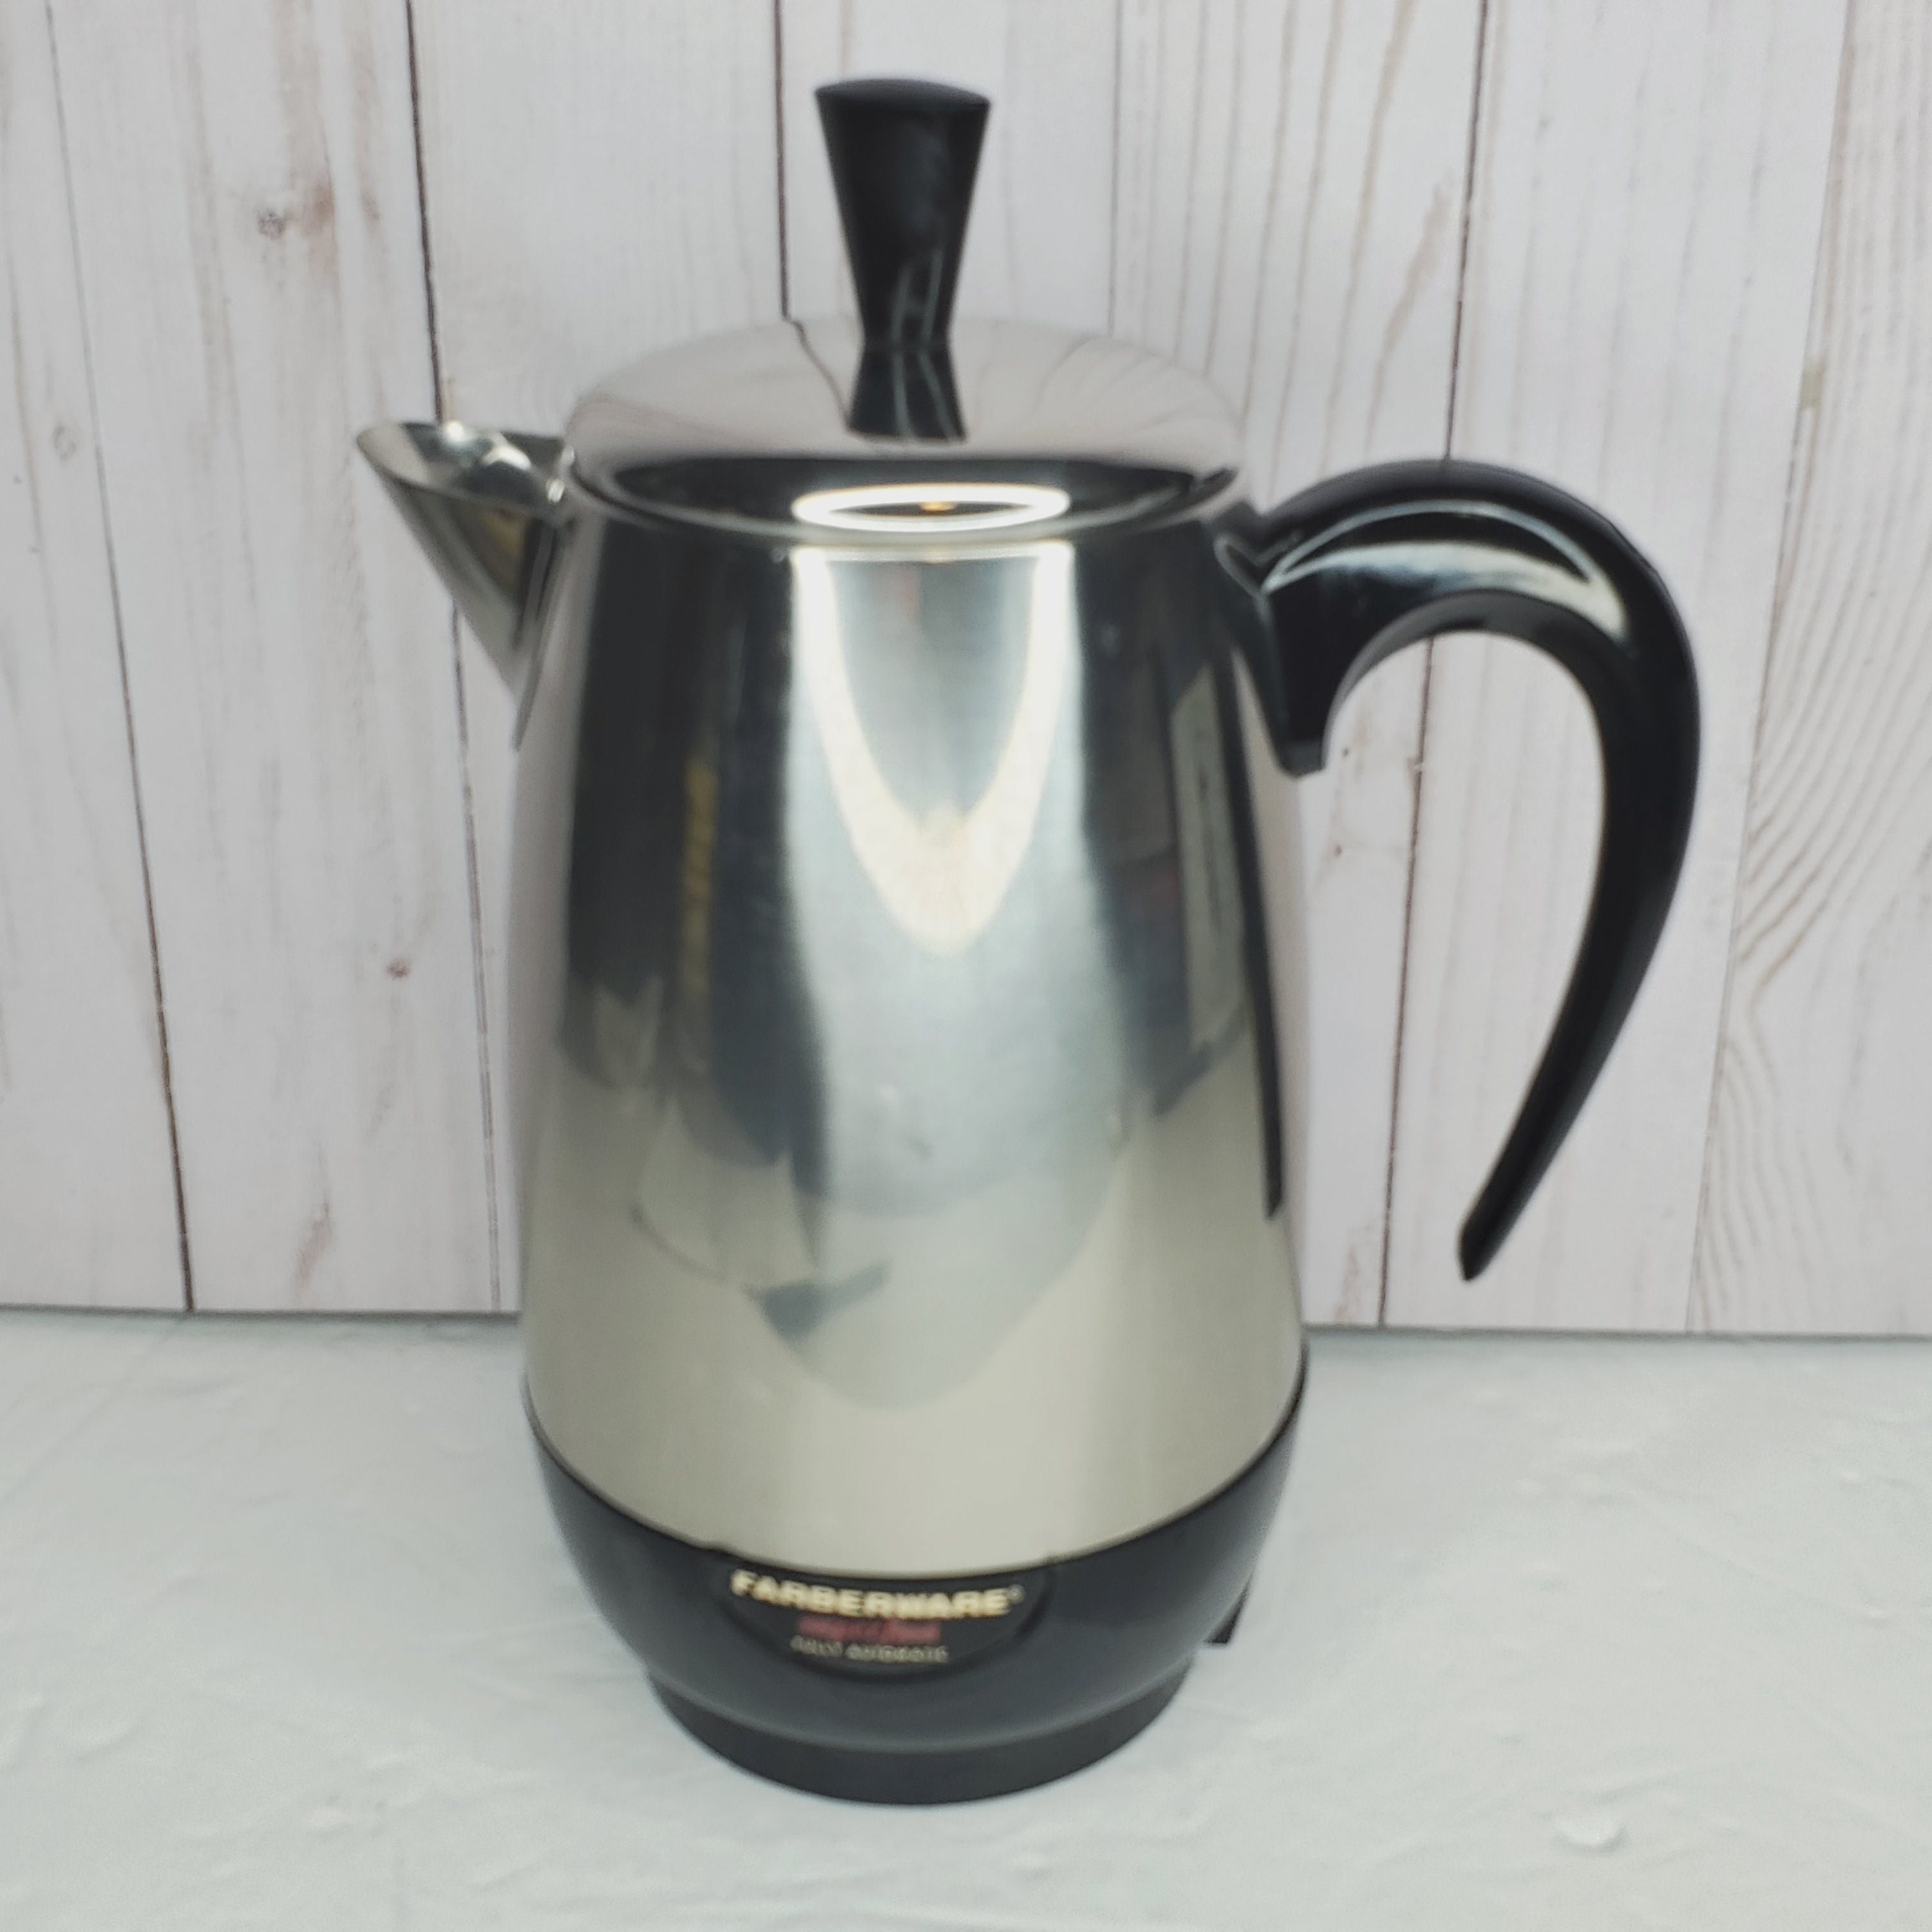 Vtg Farberware 2 8 Cup Coffee Pot Stainless Steel & Chrome Electric  Percolator Model 138B 